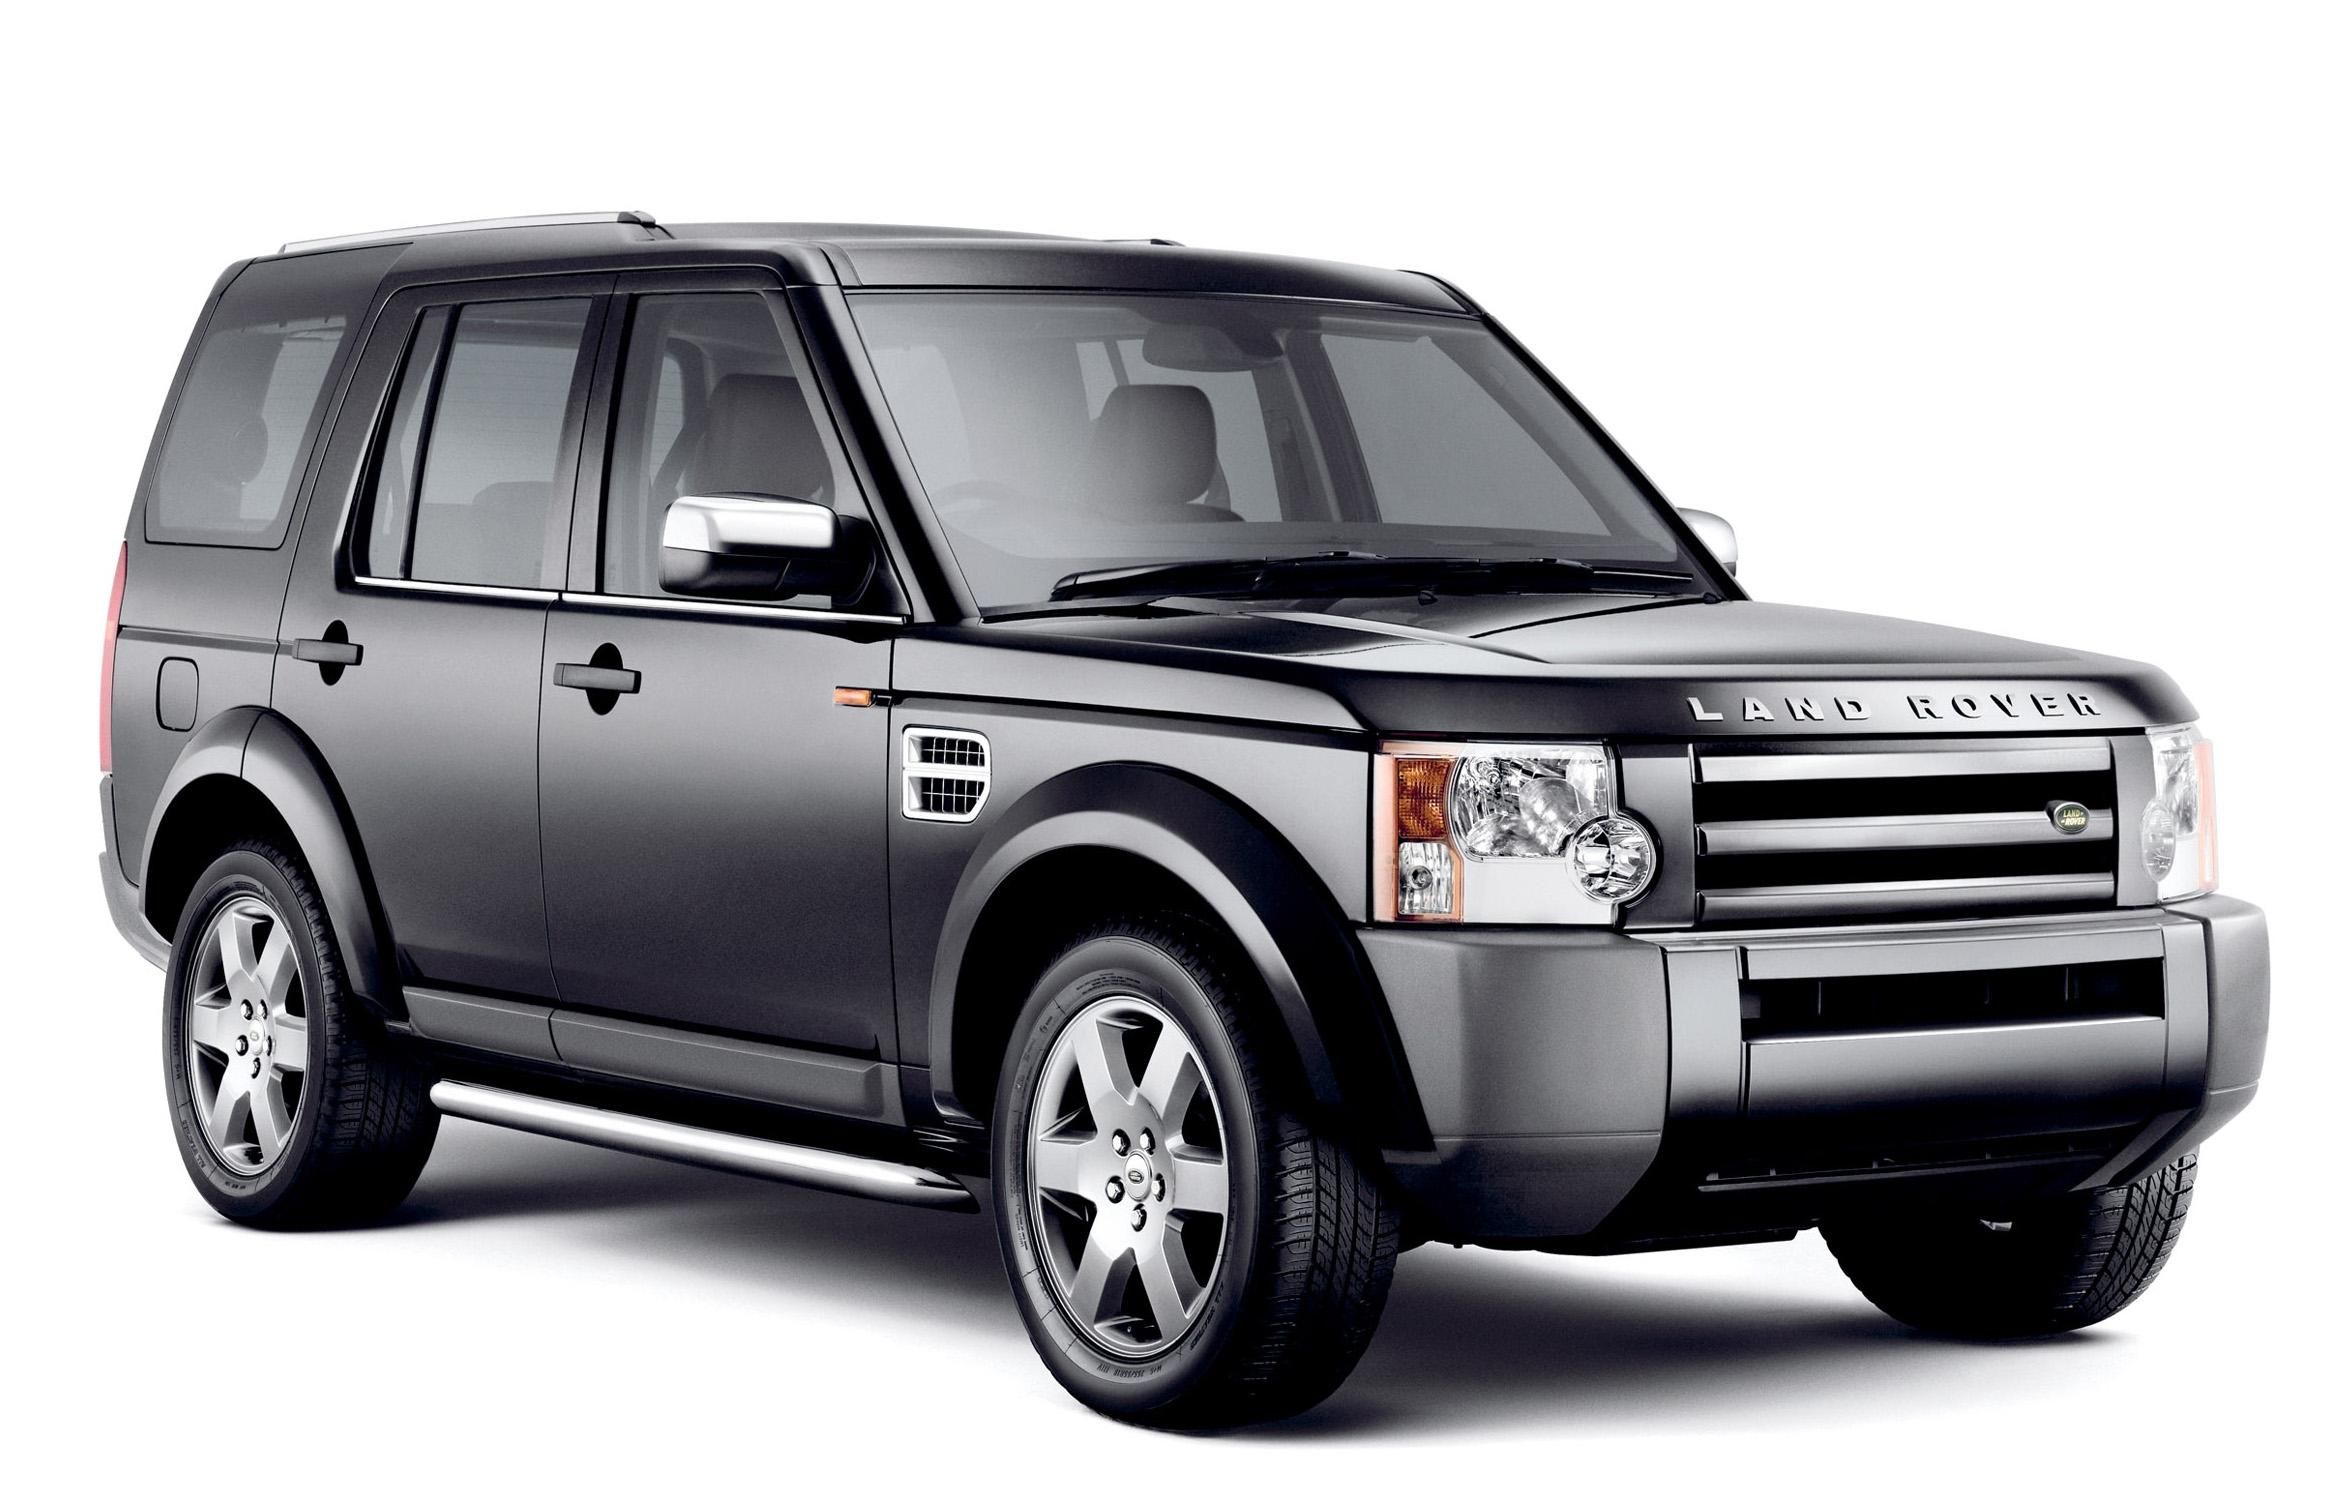 Black Land Rover Discovery 3 standing 